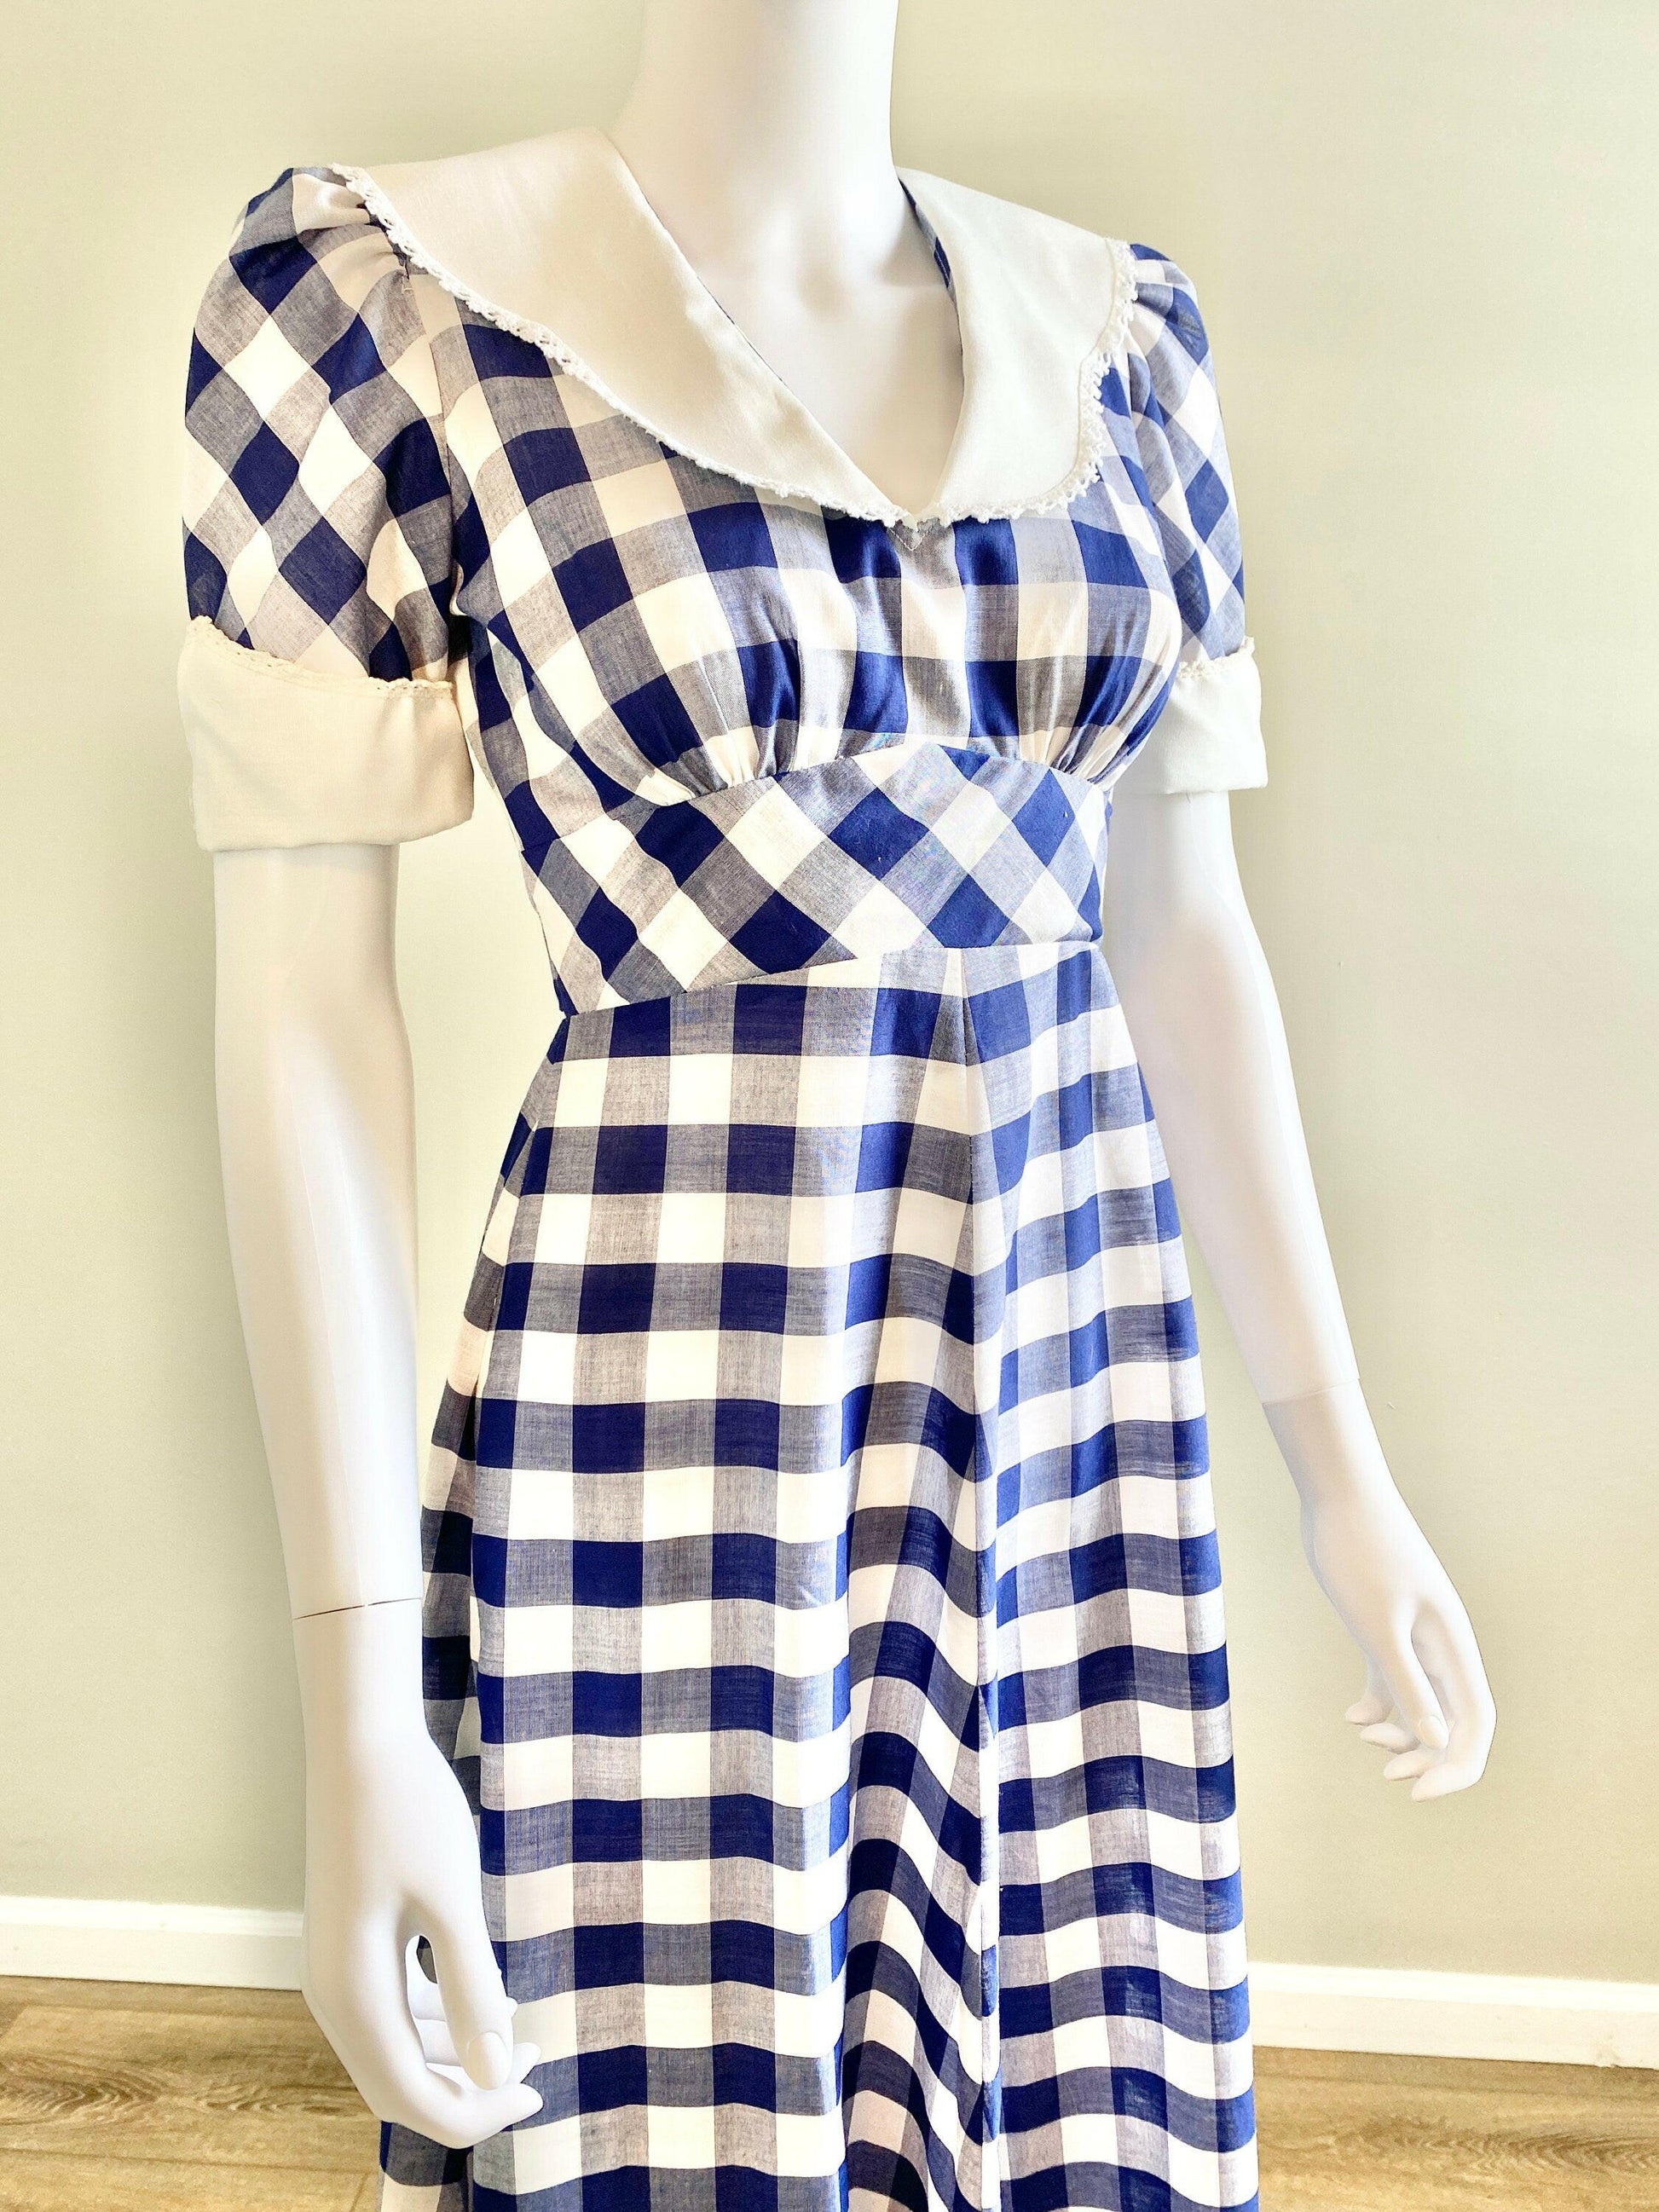 Vintage 1970s Navy Gingham Puff Sleeve Dress / 70s does 1930s Party Dress / Size S M